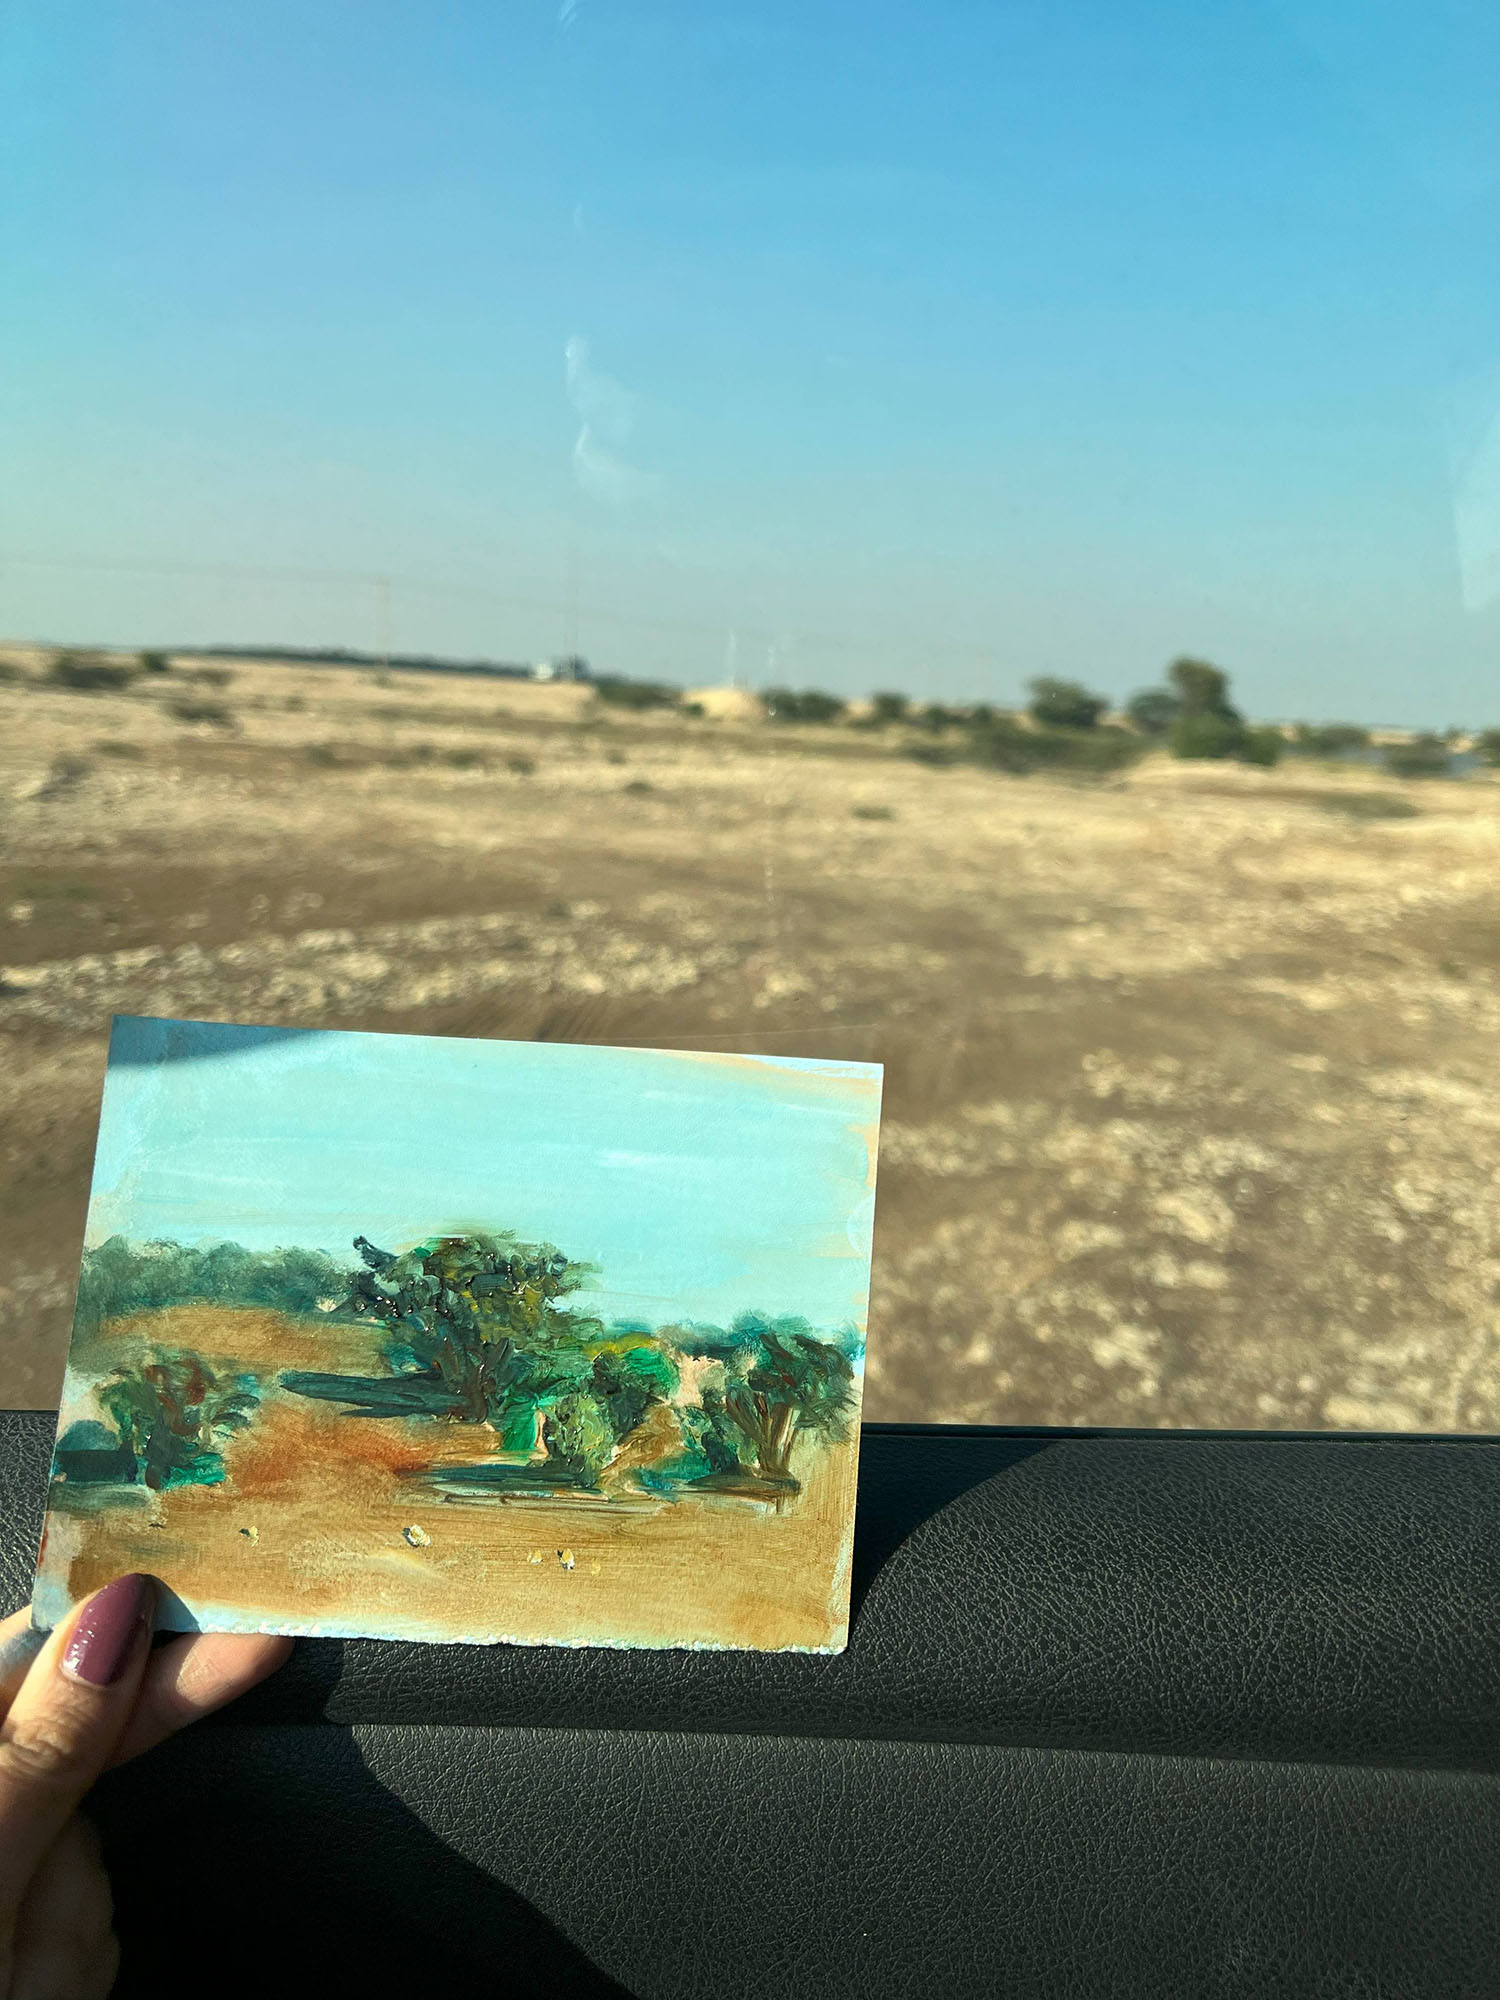 Hessa working on an oil painting on location in the desert